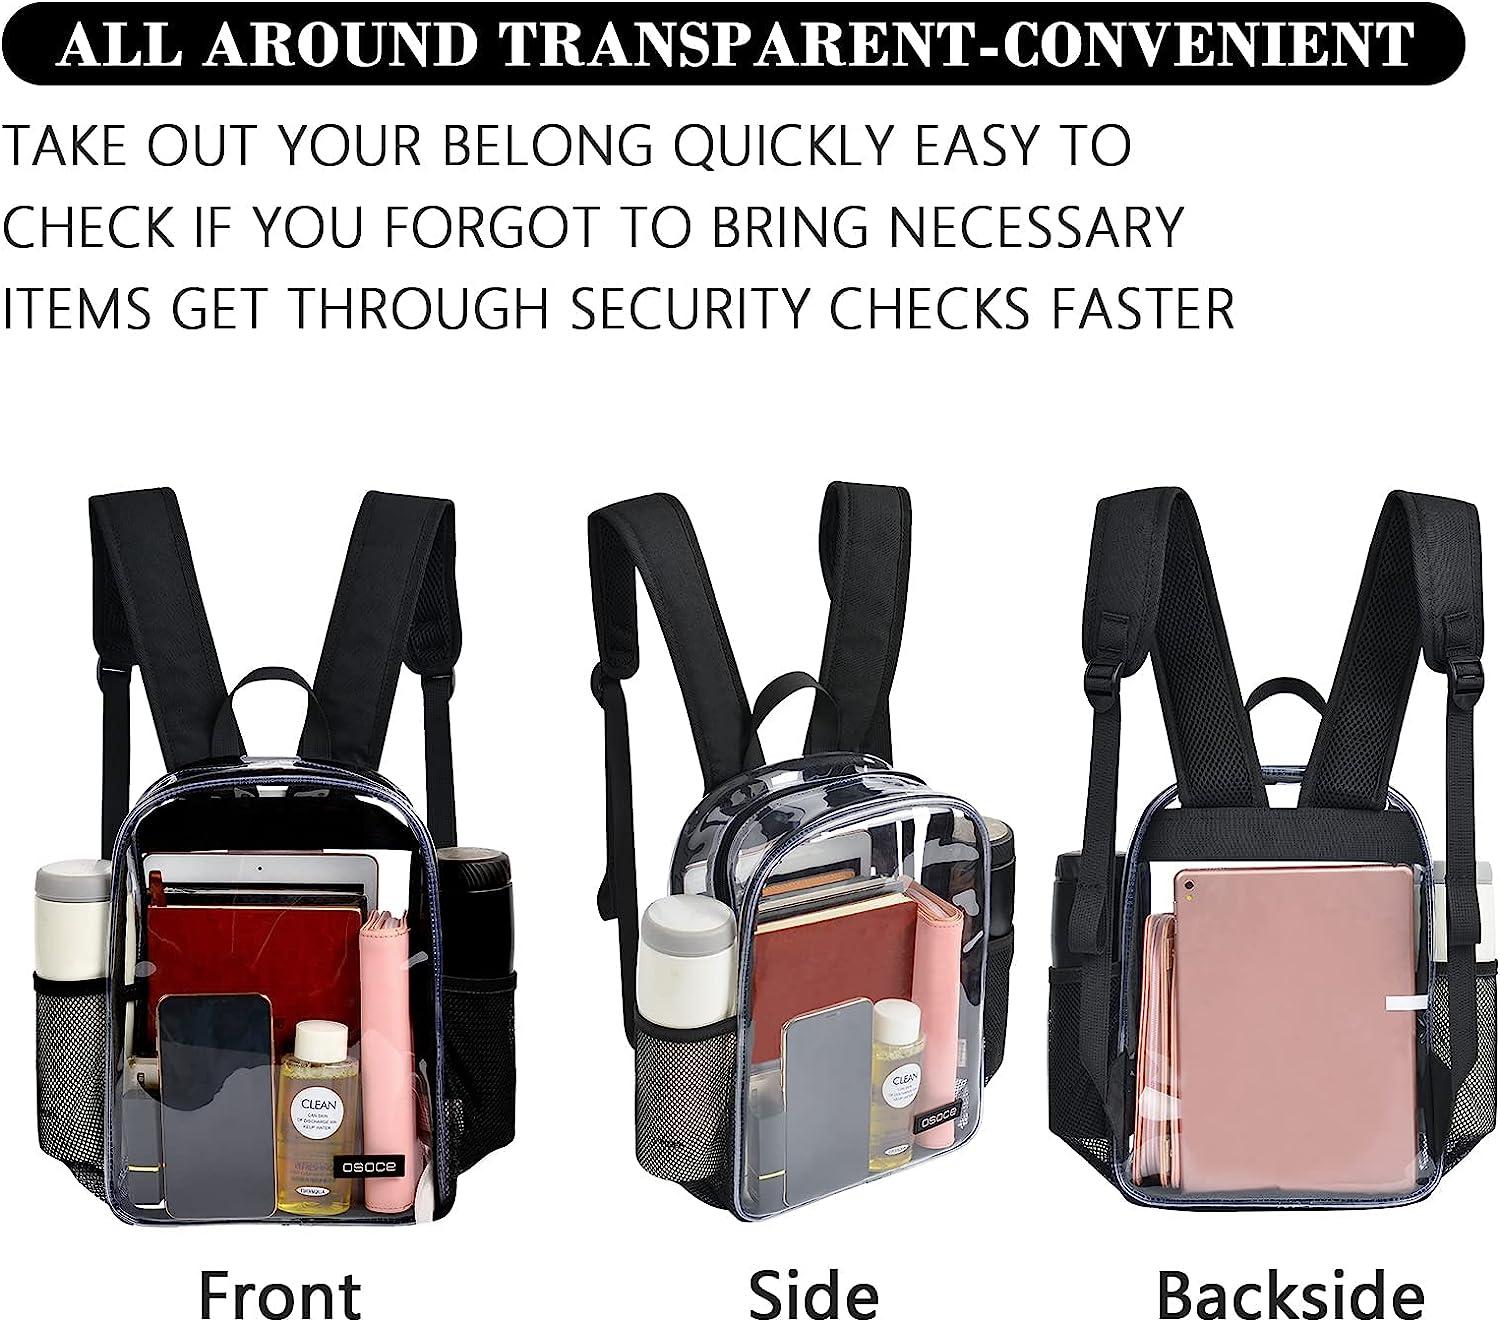 Check this! The Crossbody Bag is very clean and sturdy. I really